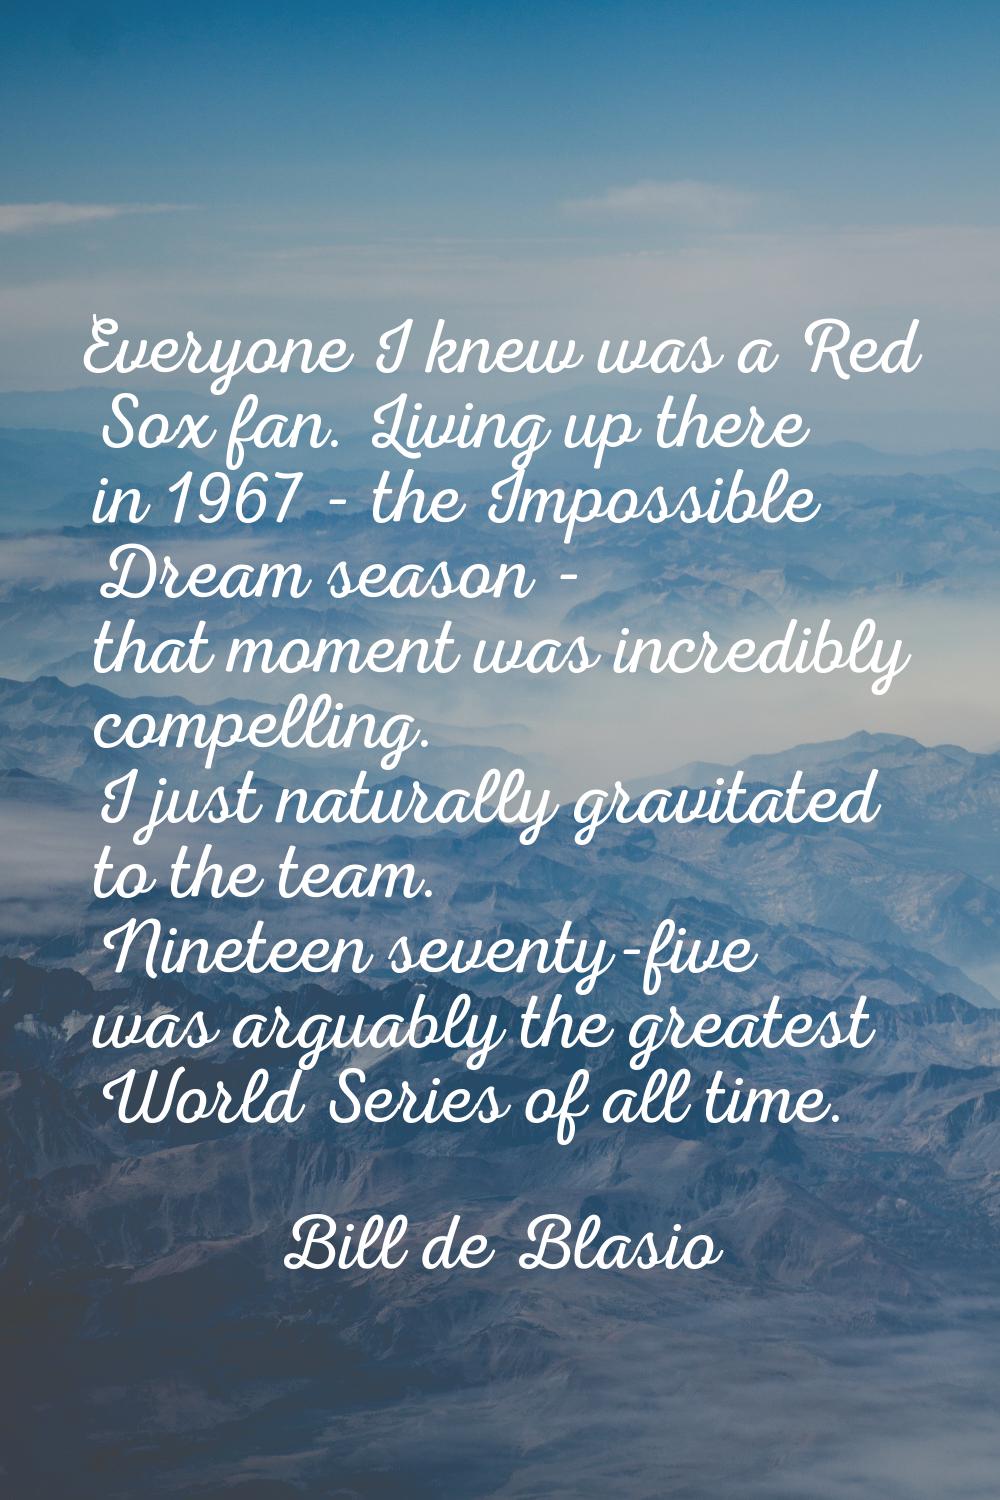 Everyone I knew was a Red Sox fan. Living up there in 1967 - the Impossible Dream season - that mom